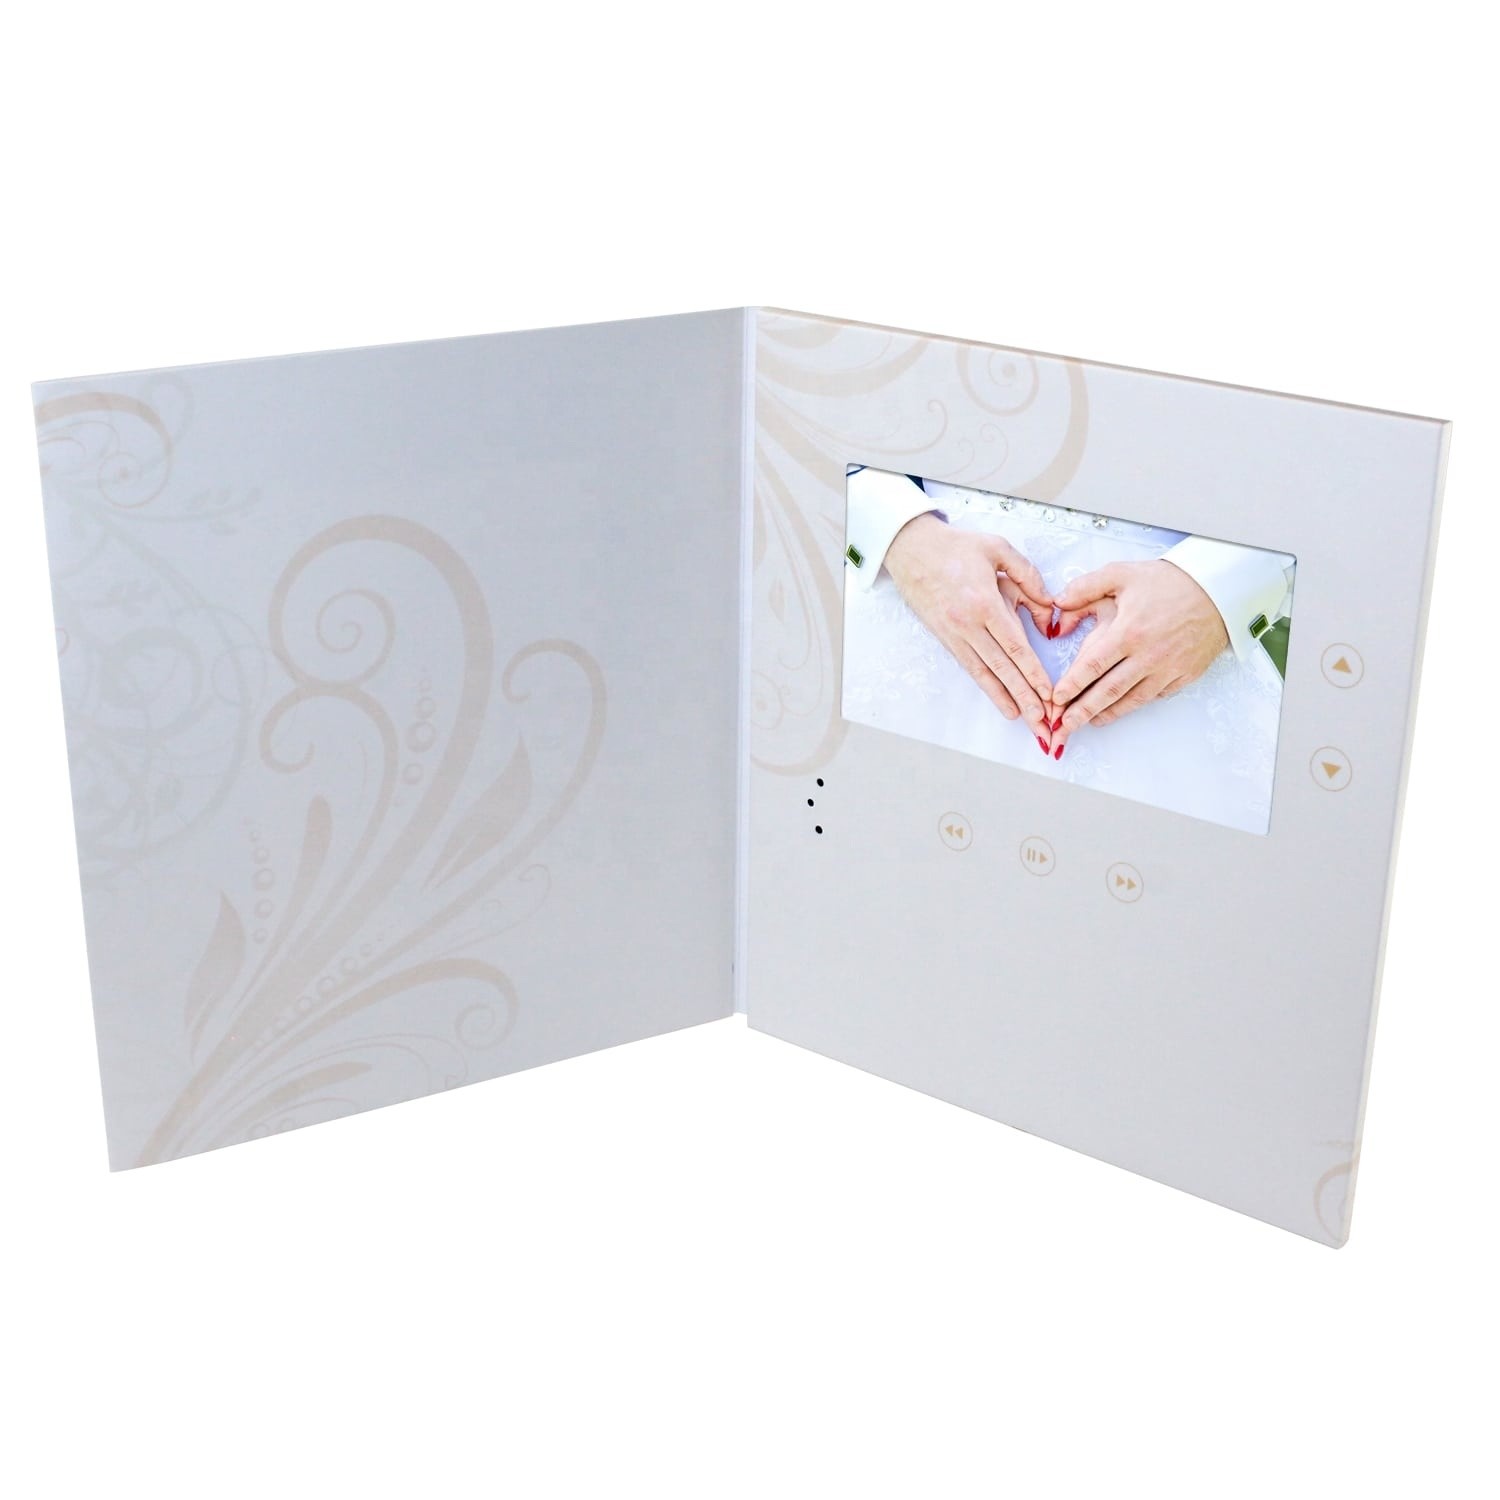 Quality Customized 4.3Inch 5inch 7inch Lcd video brochure Video Book Greeting Card Folder Digital Business Card Wedding Card for sale